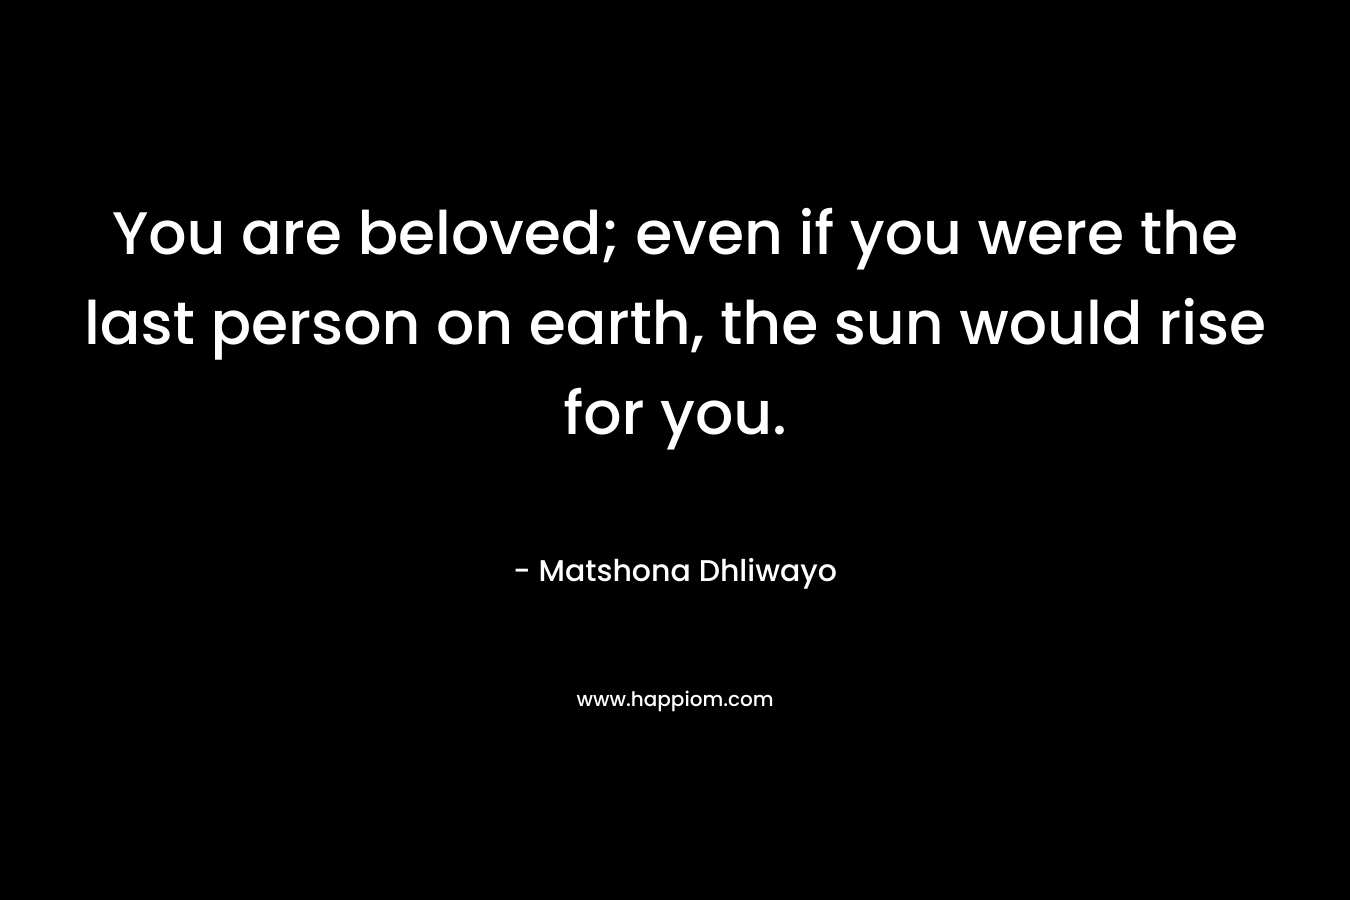 You are beloved; even if you were the last person on earth, the sun would rise for you.